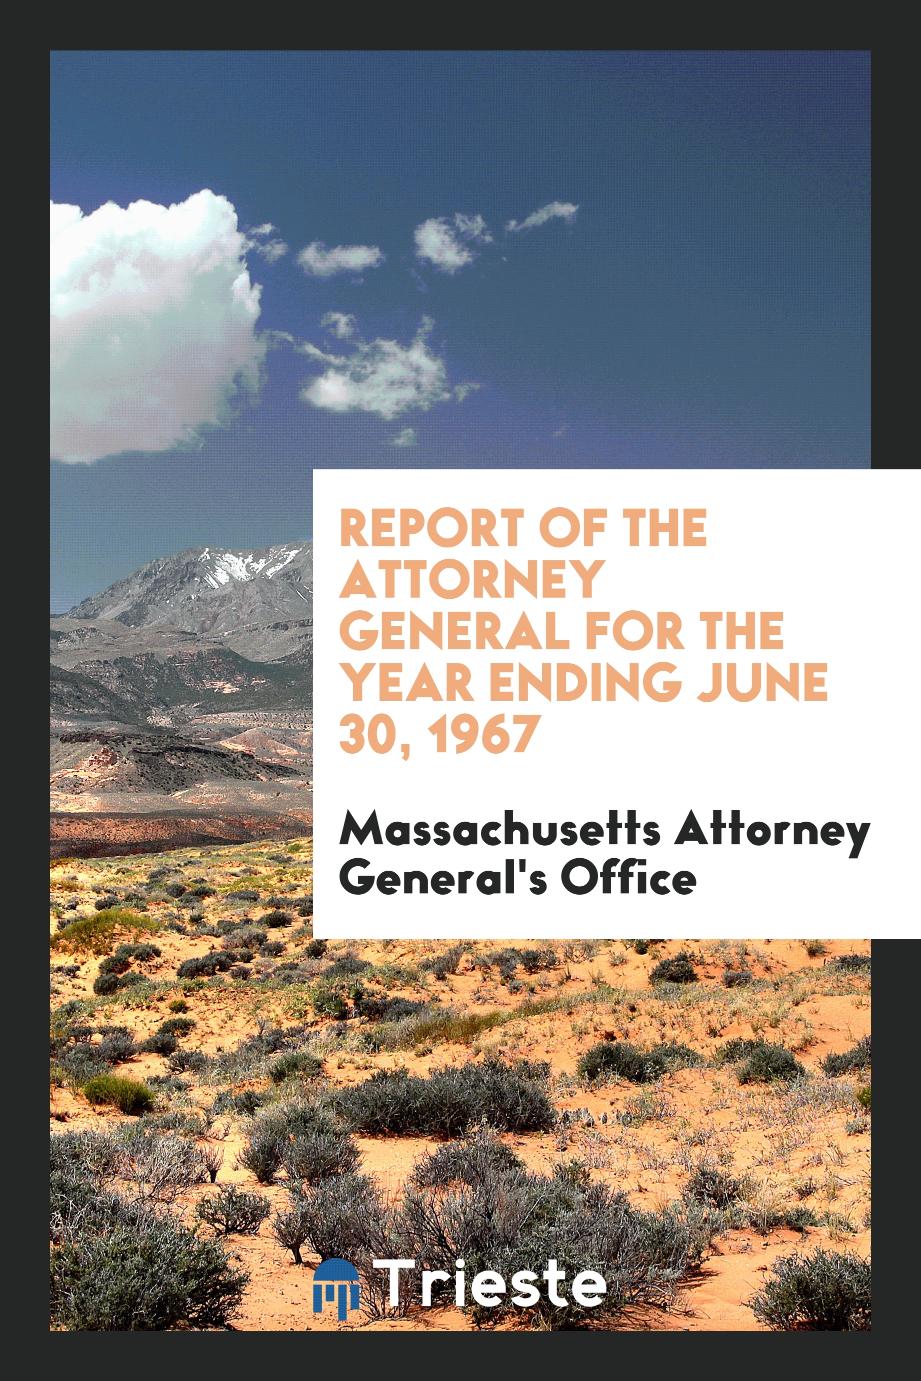 Report of the attorney general for the year ending June 30, 1967